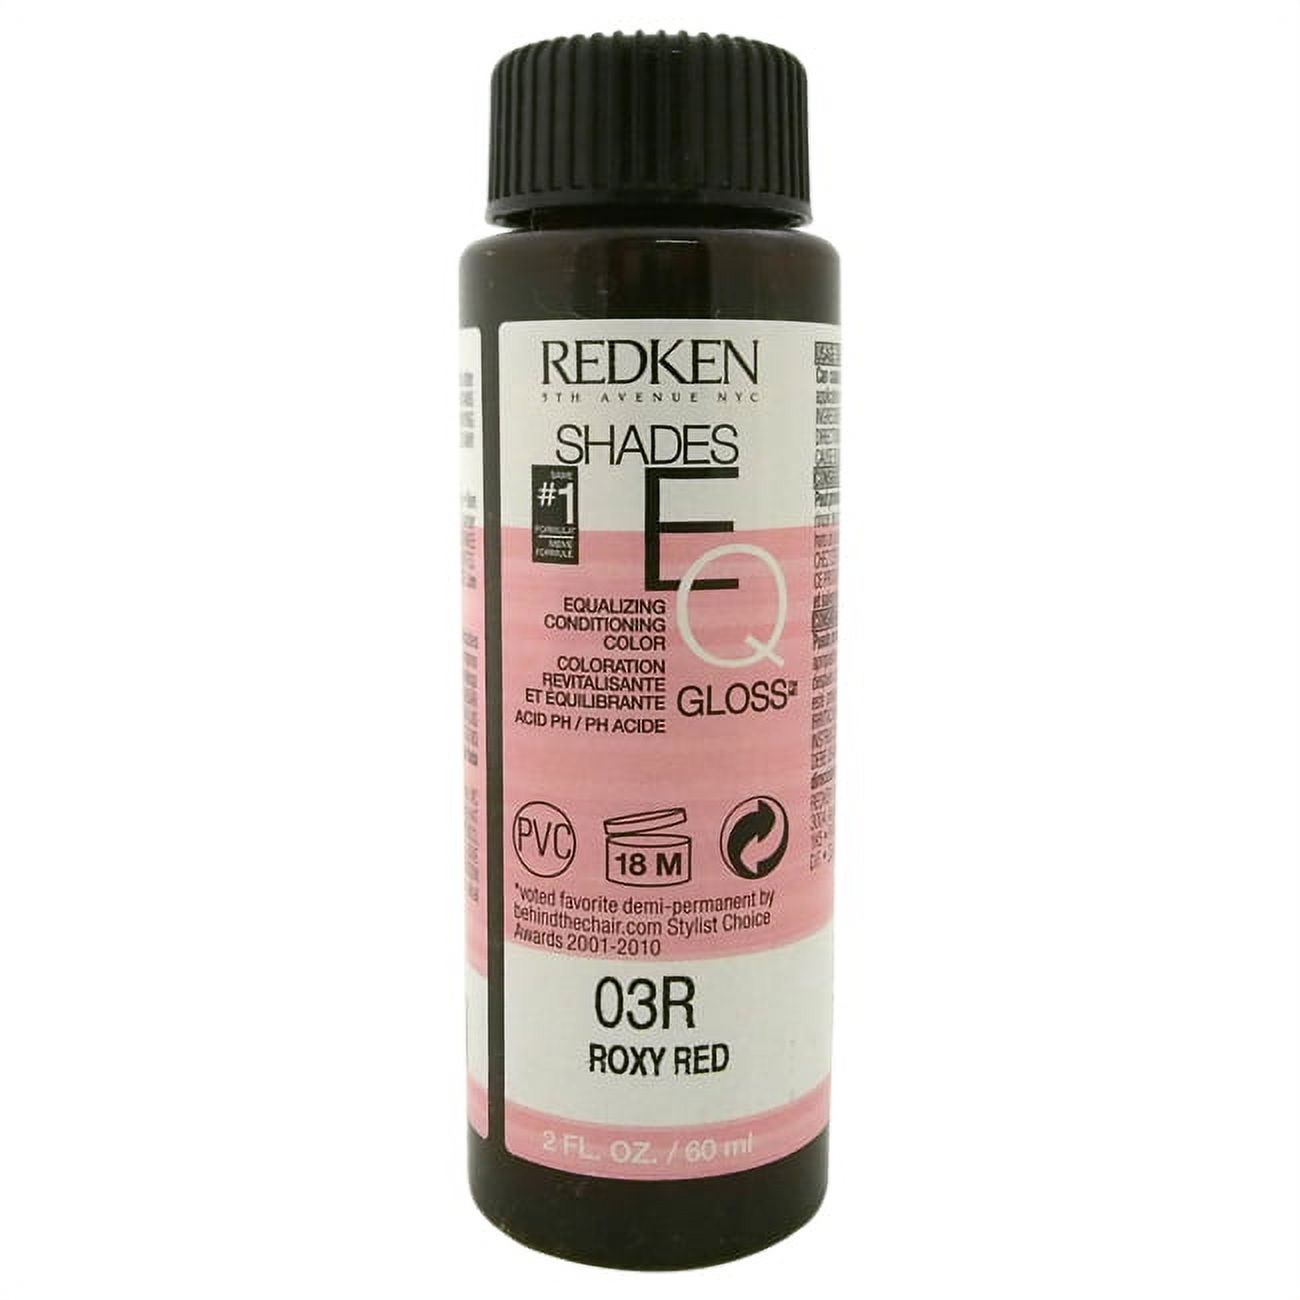 Redken Shades Eq Hair Color Gloss 03R - Roxy Red For Women, 2 Oz - image 1 of 2